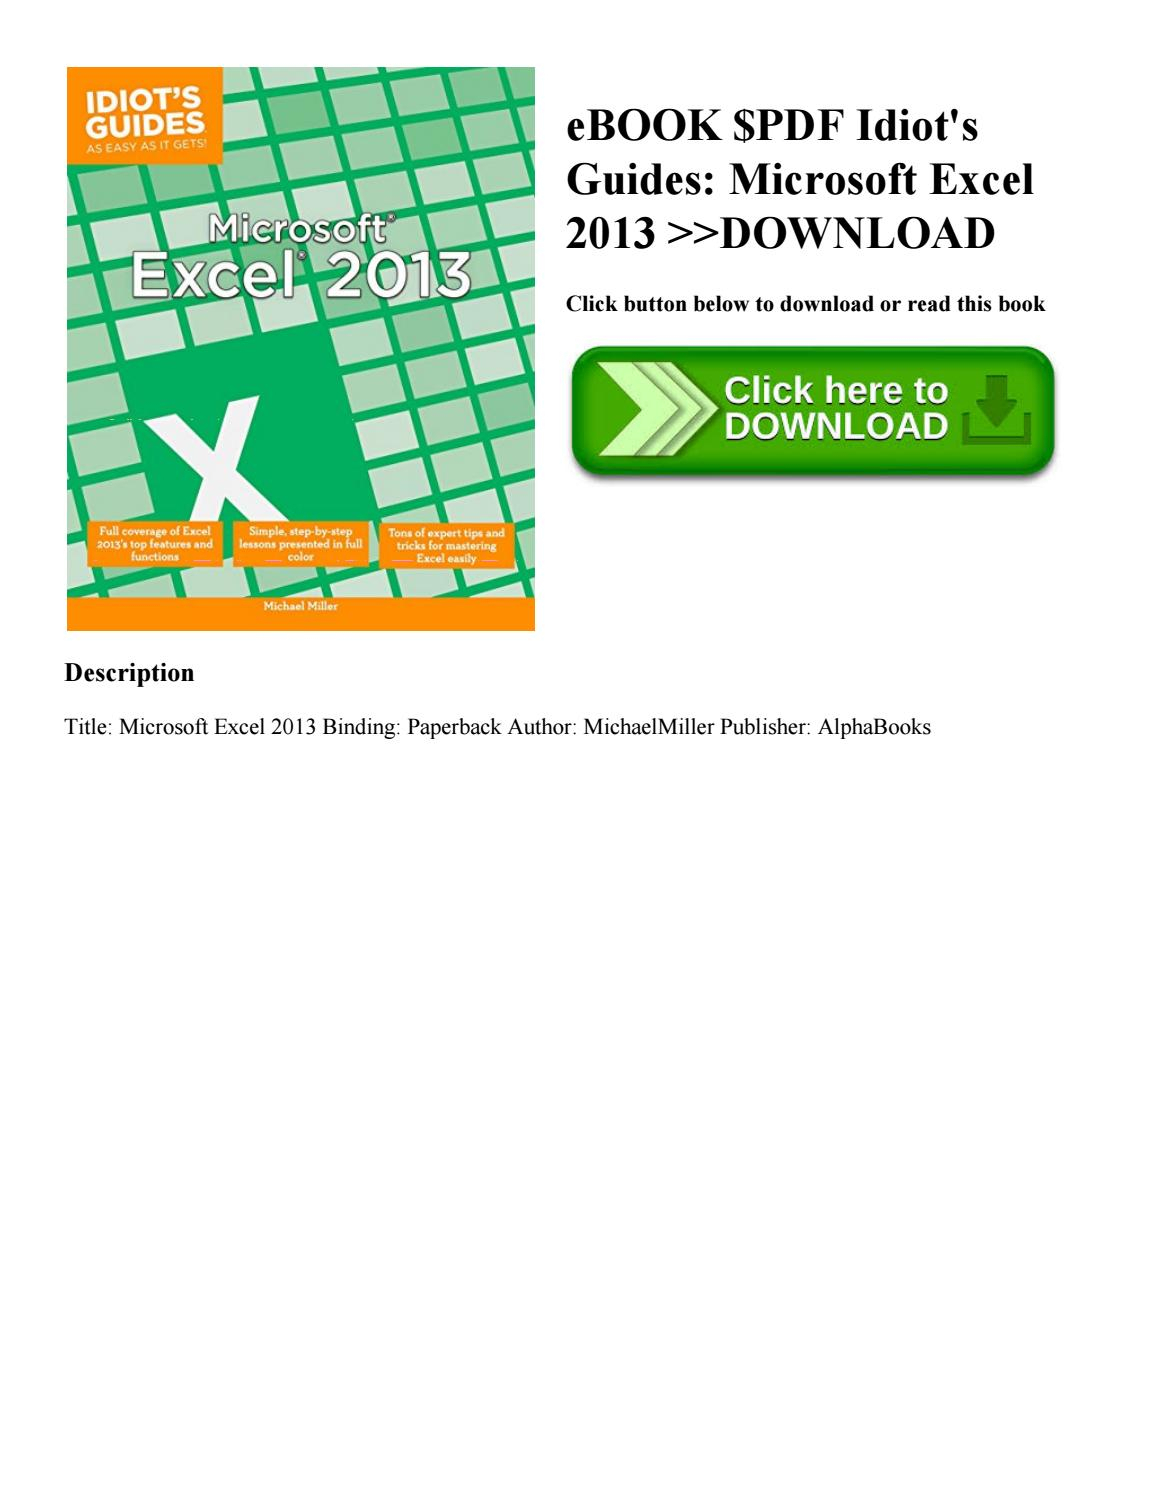 Idiot's Guide To Spreadsheets In Ebook $Pdf Idiot's Guides Microsoft Excel 2013 Download